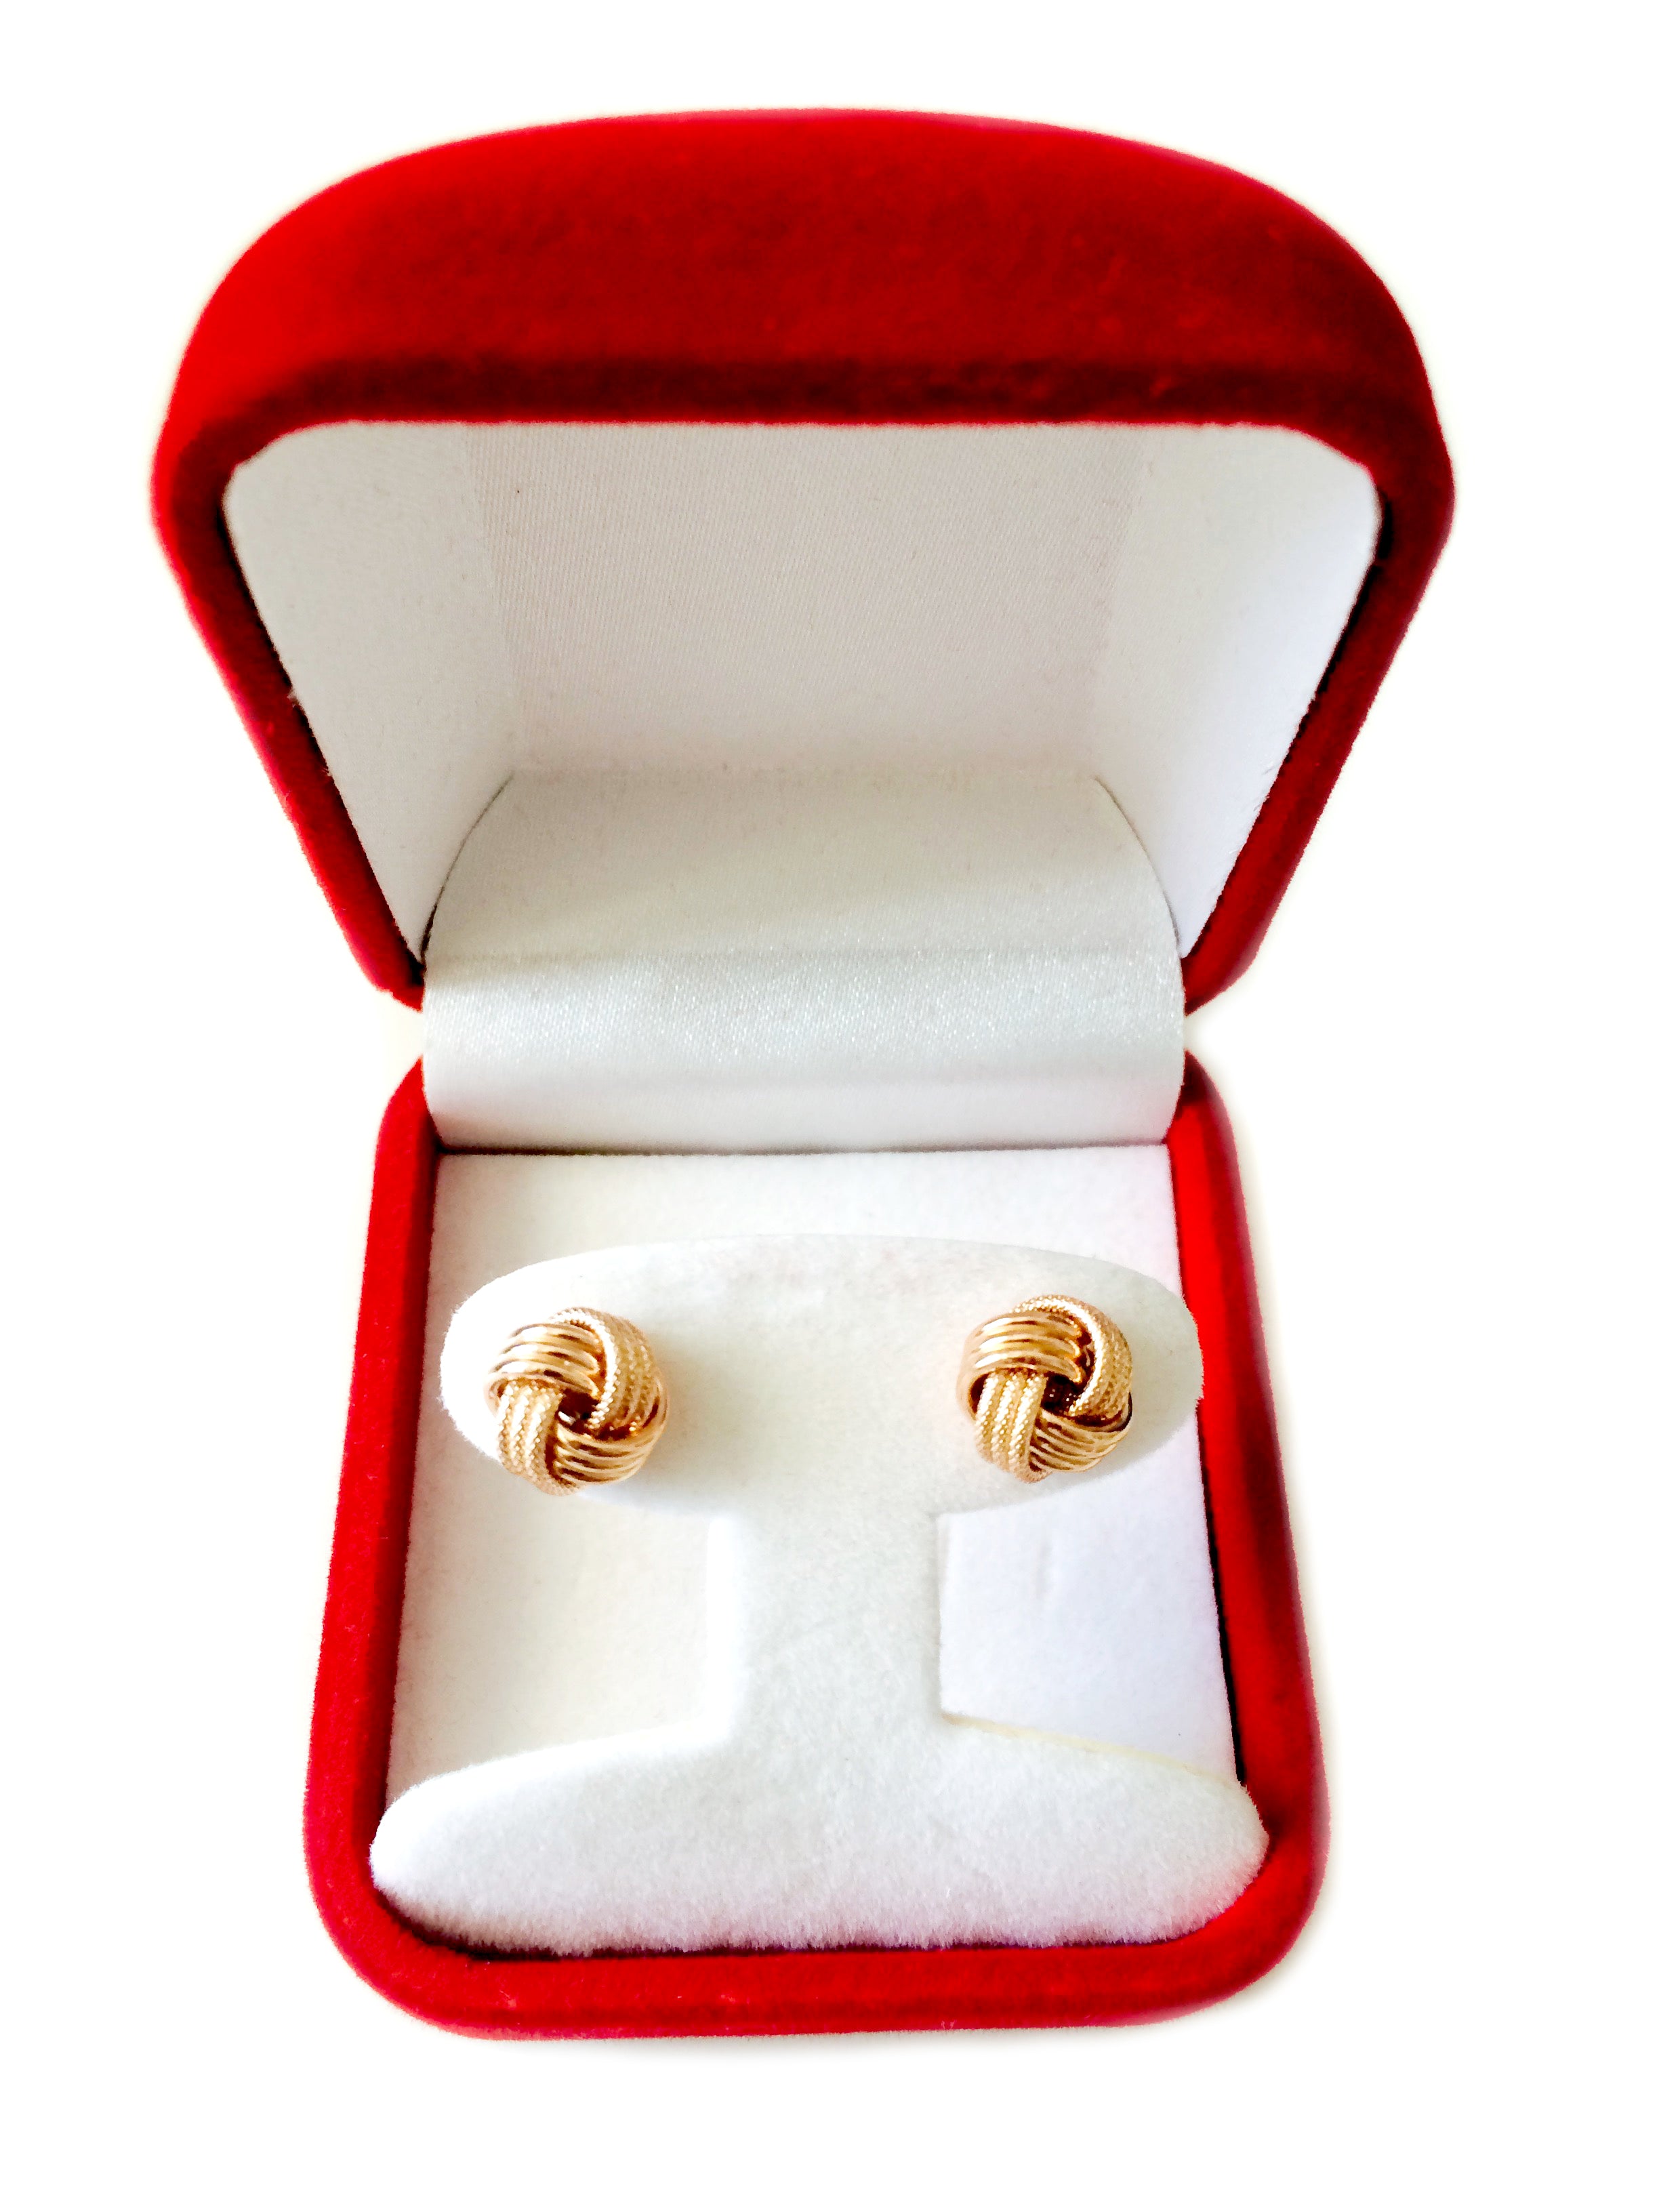 14k Gold Shiny And Textured Triple Row Love Knot Stud Earrings, 10mm